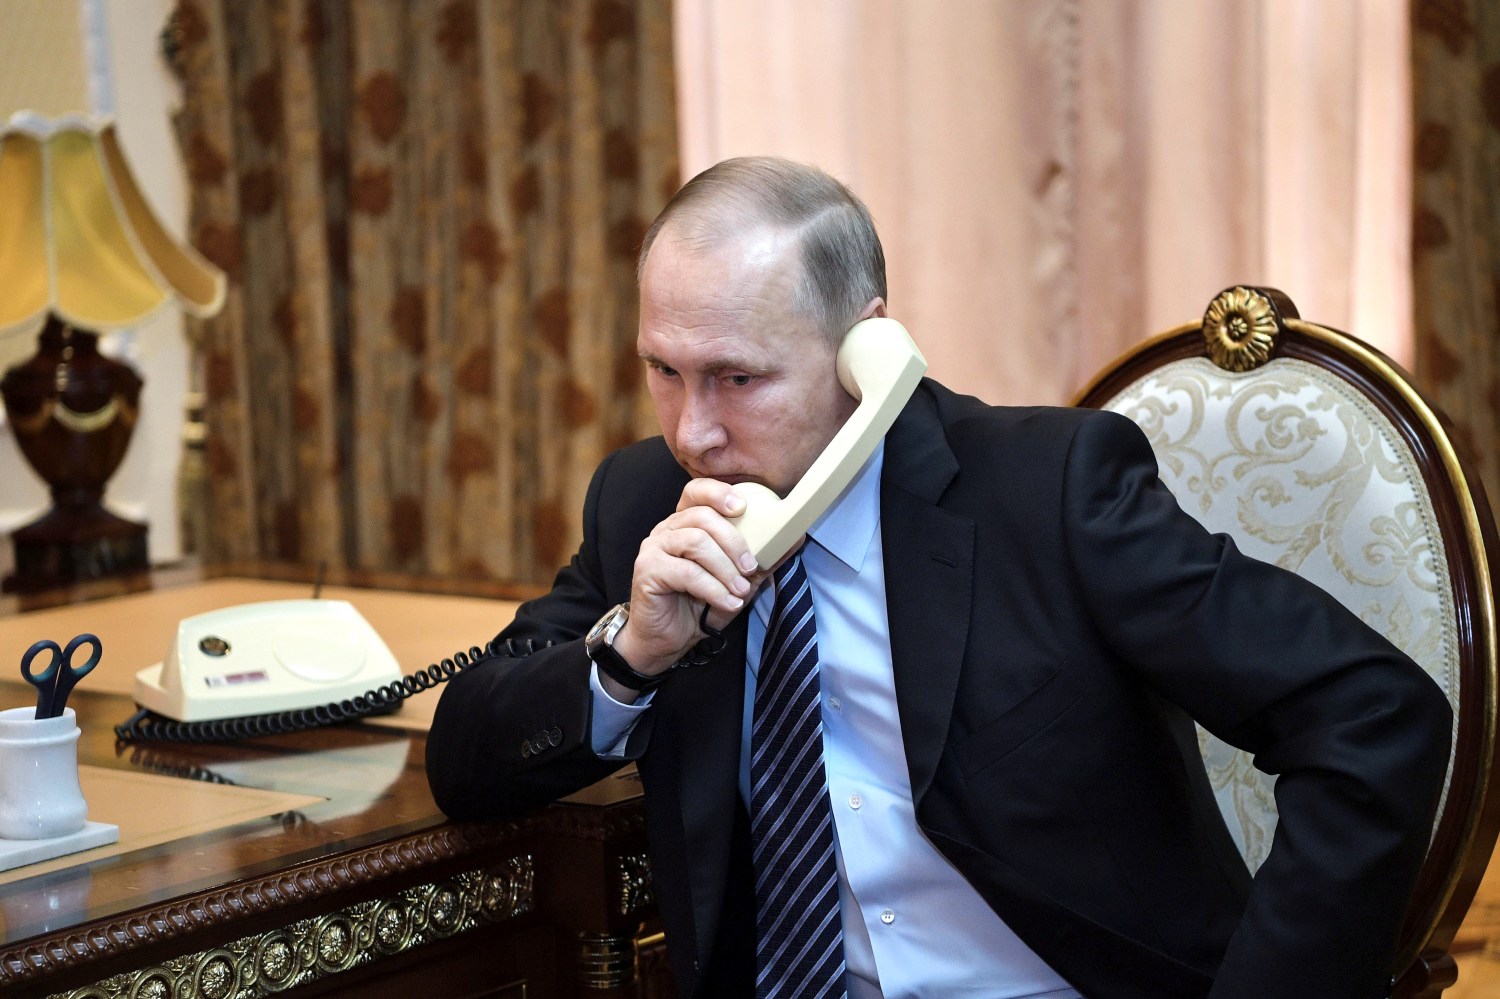 Russia's President Vladimir Putin speaks by phone, February 28, 2017. Sputnik/Alexei Nikolsky/Kremlin via REUTERS ATTENTION EDITORS - THIS IMAGE WAS PROVIDED BY A THIRD PARTY. EDITORIAL USE ONLY. THIS IMAGE HAS BEEN SUPPLIED BY A THIRD PARTY. IT IS DISTRIBUTED, EXACTLY AS RECEIVED BY REUTERS, AS A SERVICE TO CLIENTS - RTS10QE5